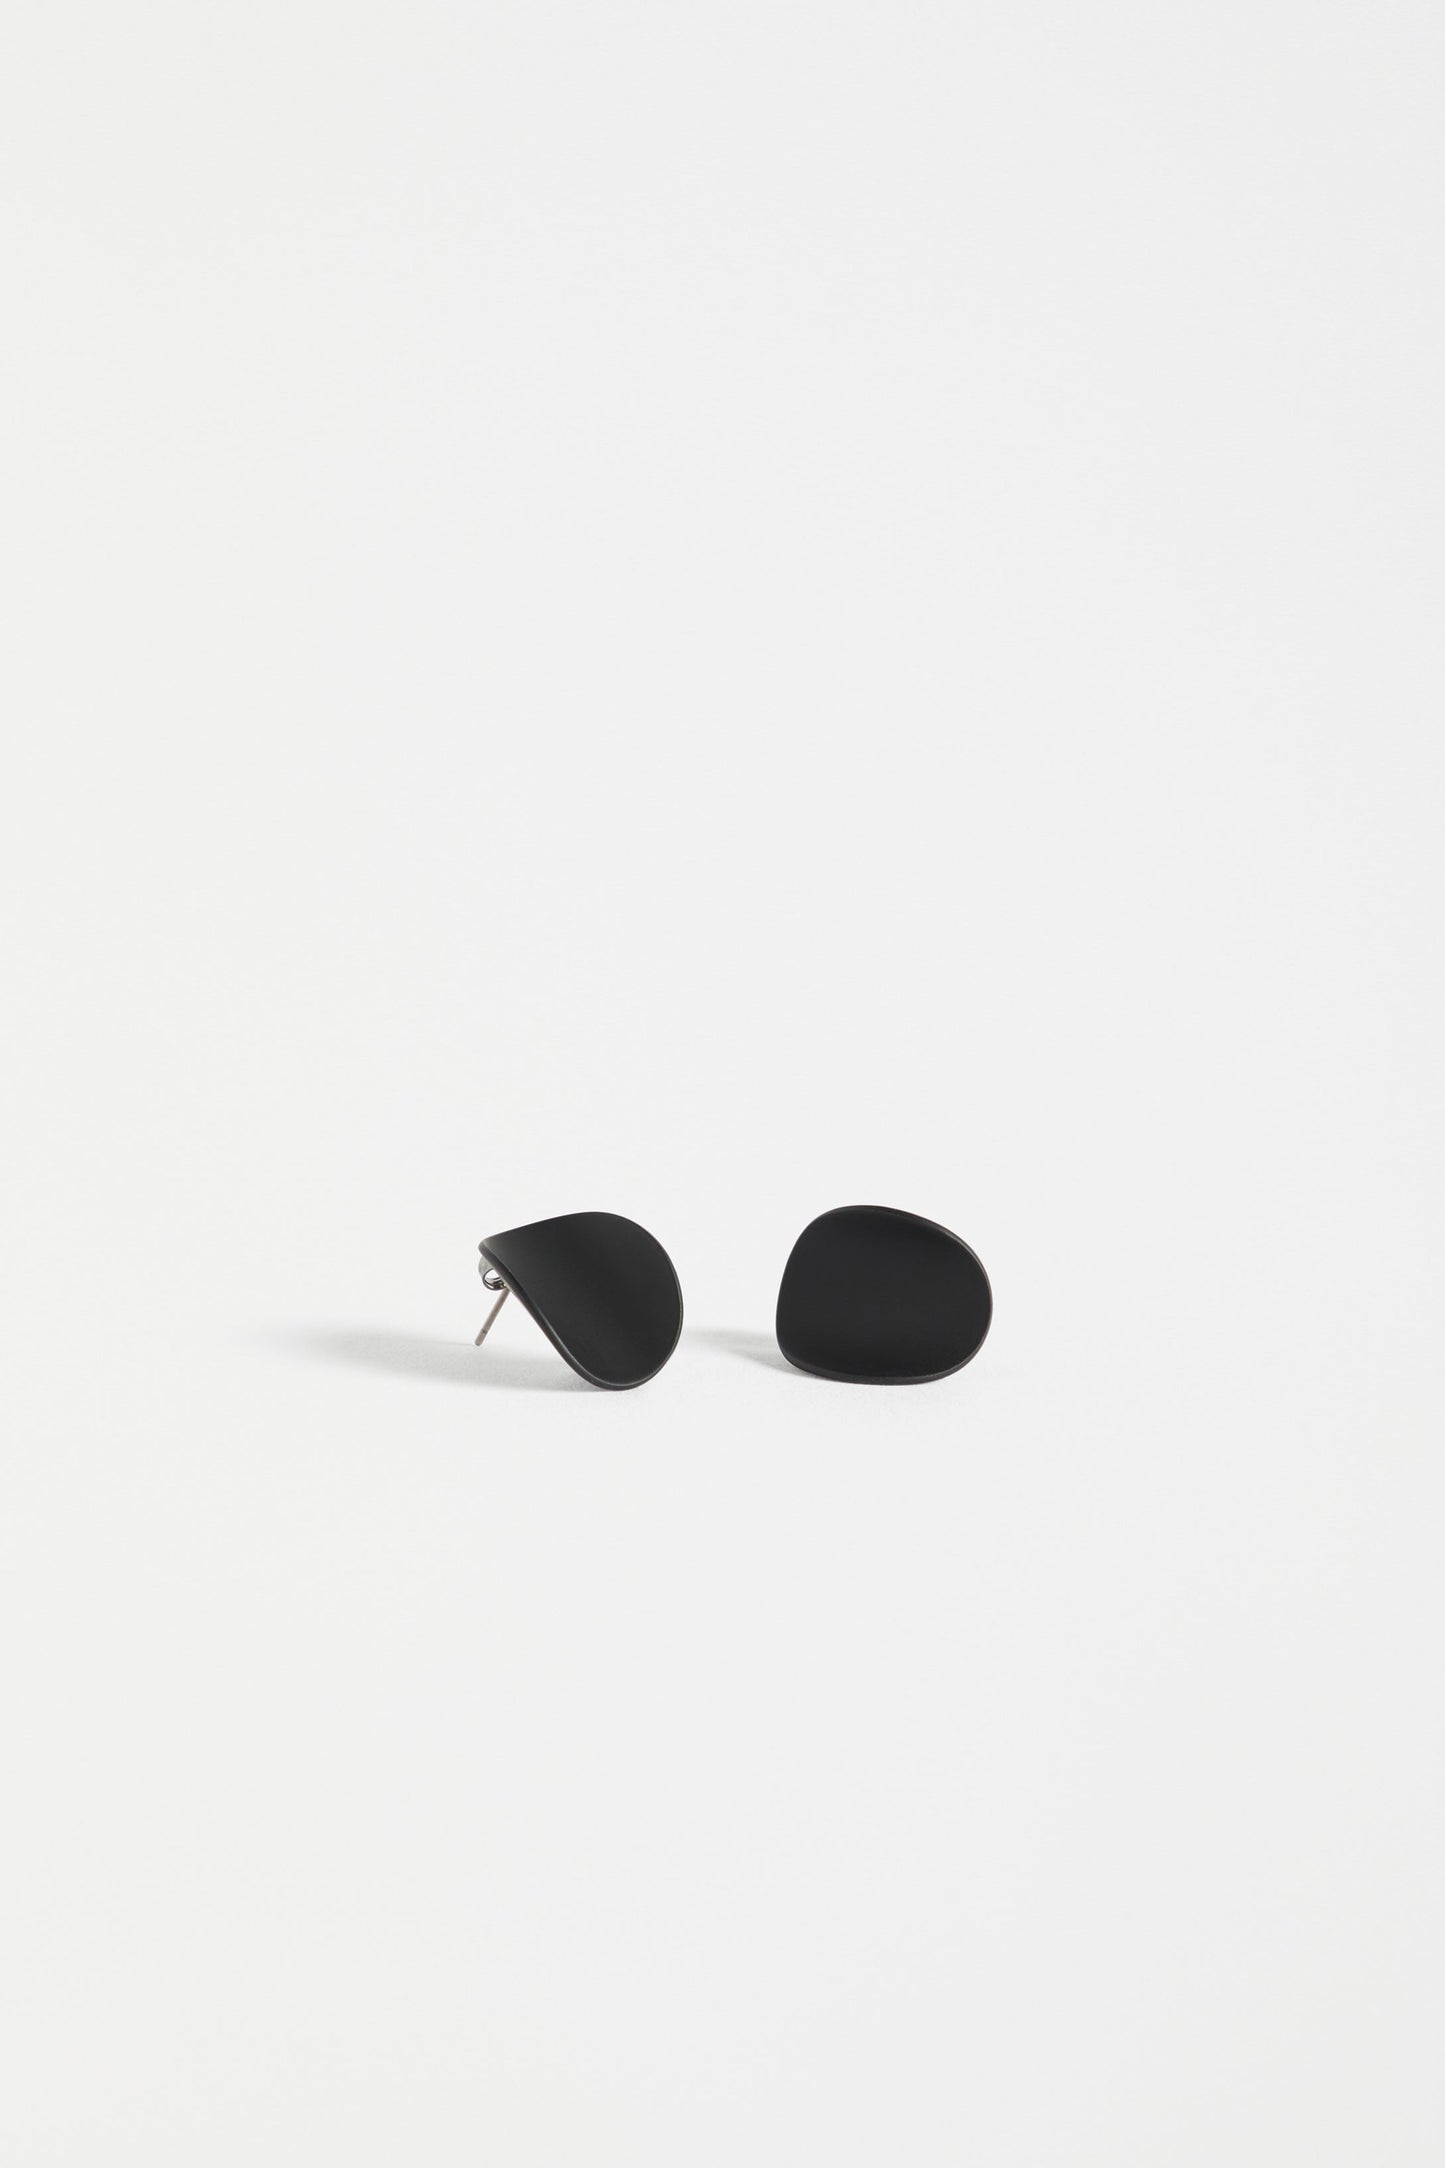 Kave Concave Oval Stud Earring | BLACK